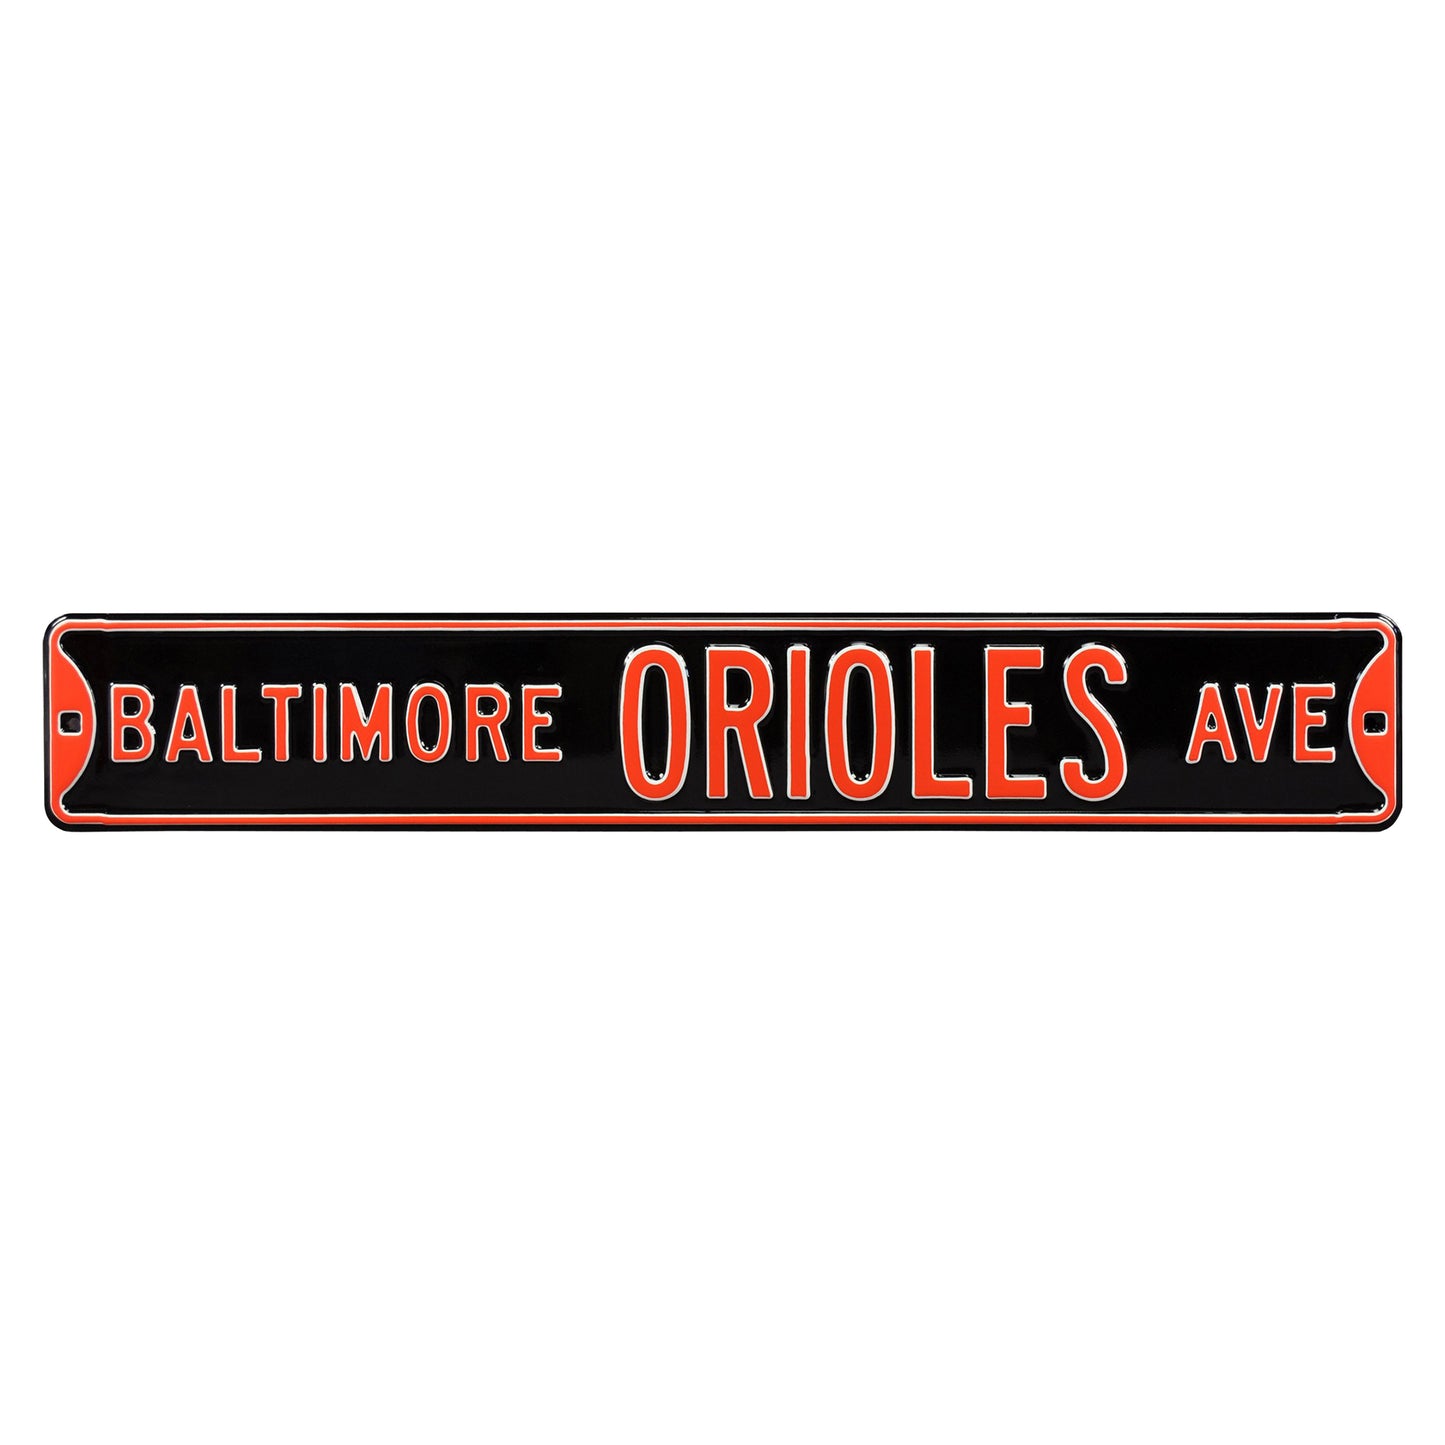 Baltimore Orioles Steel Street Sign-BALTIMORE ORIOLES AVE